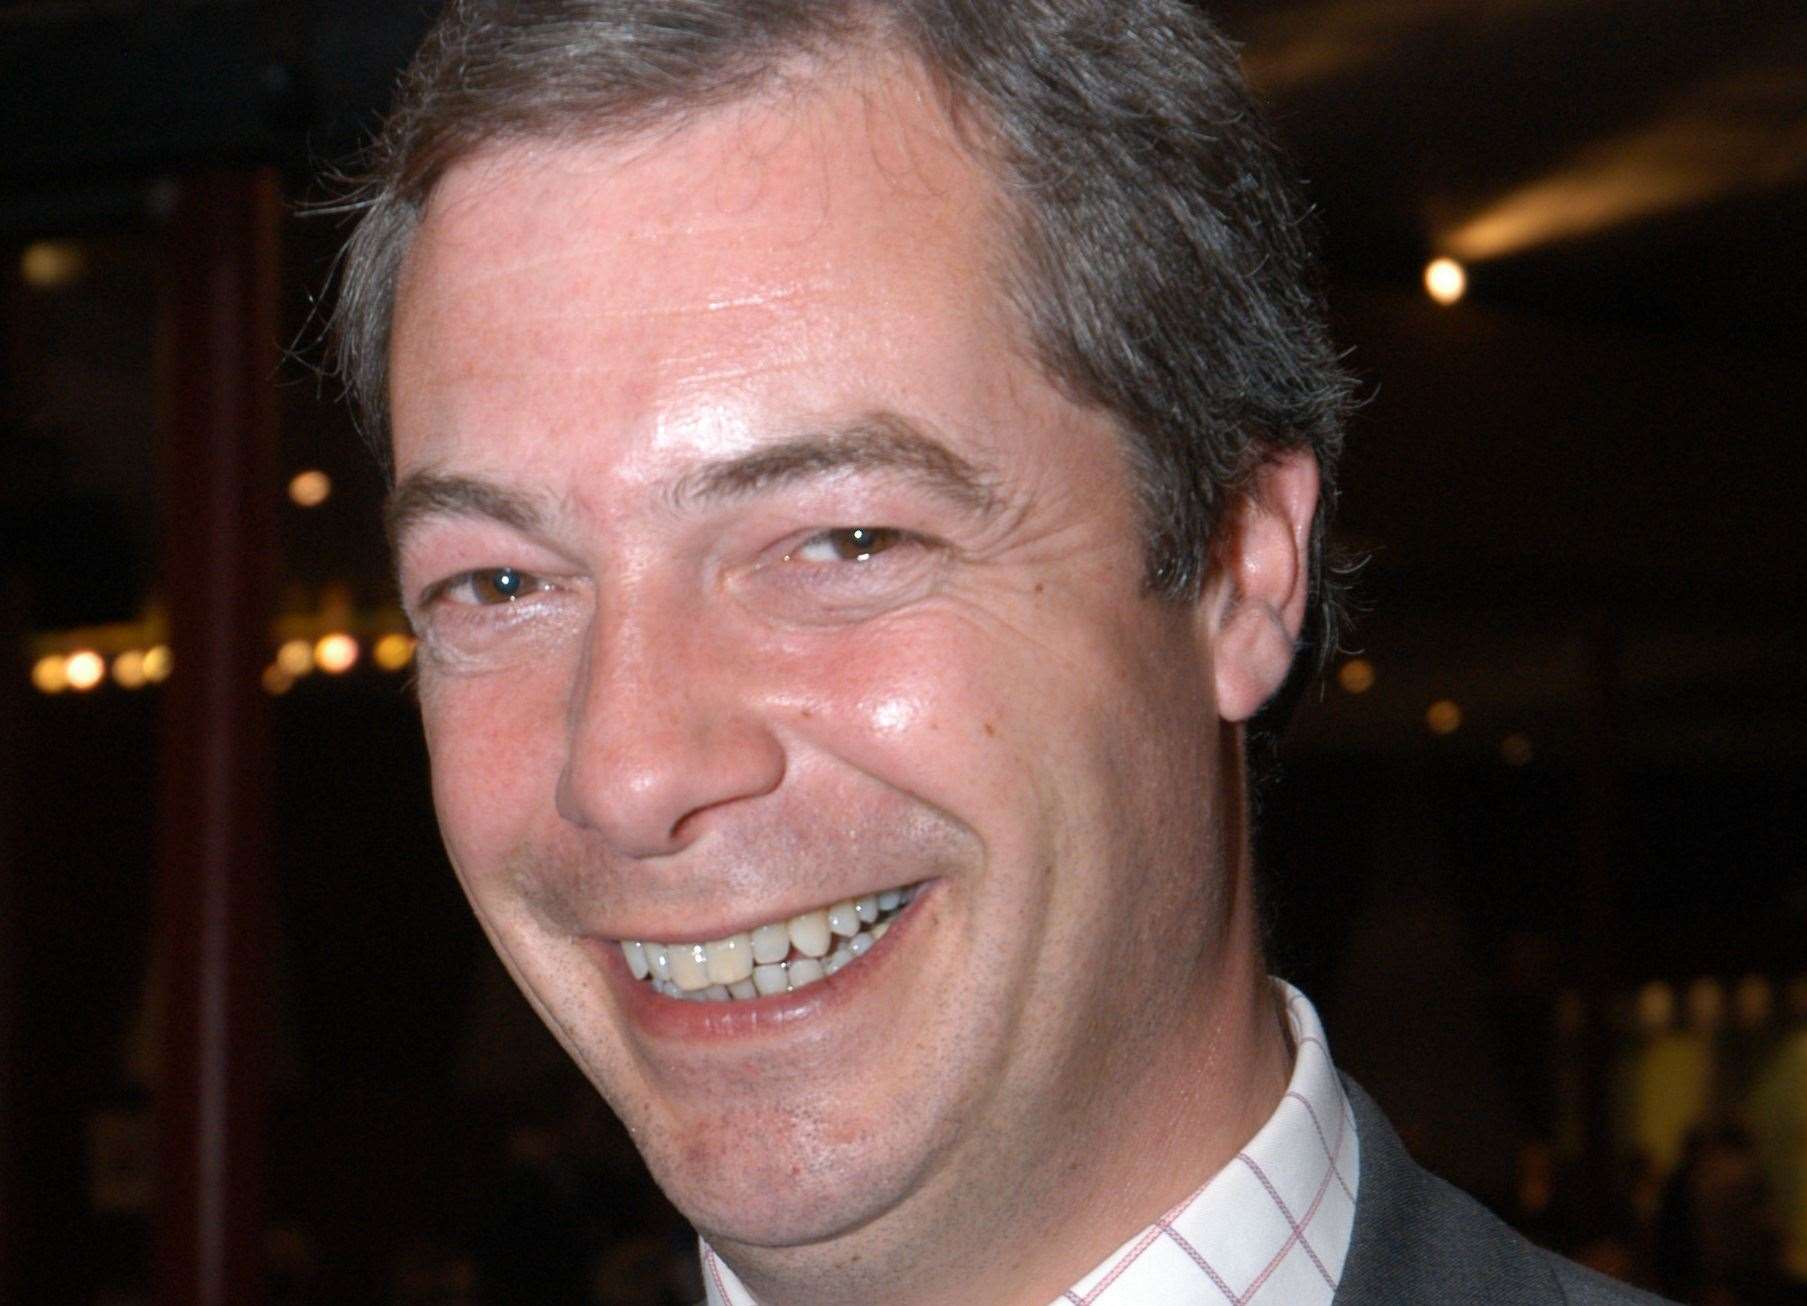 Then: Mr Farage as a fresh-faced, ahem, candidate in 2005 in South Thanet